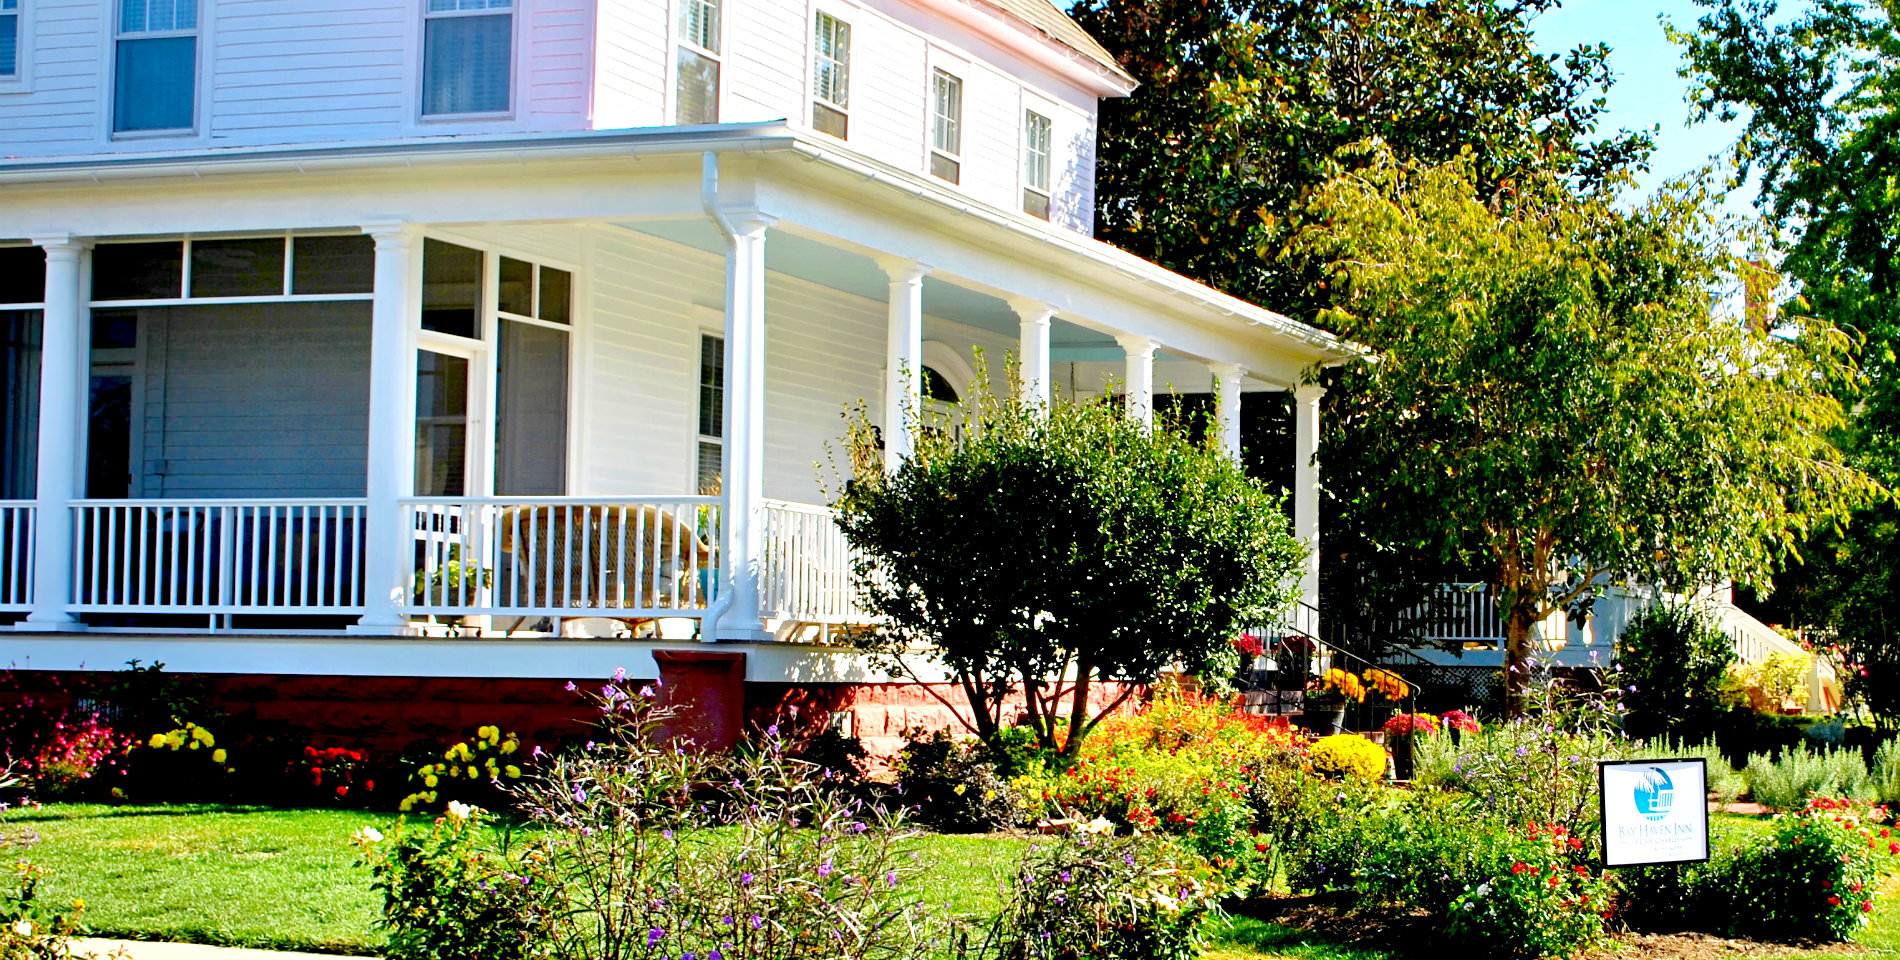 The white siding and wraparound porch of the Inn, with lush green gardens and flowers in the foreground. 